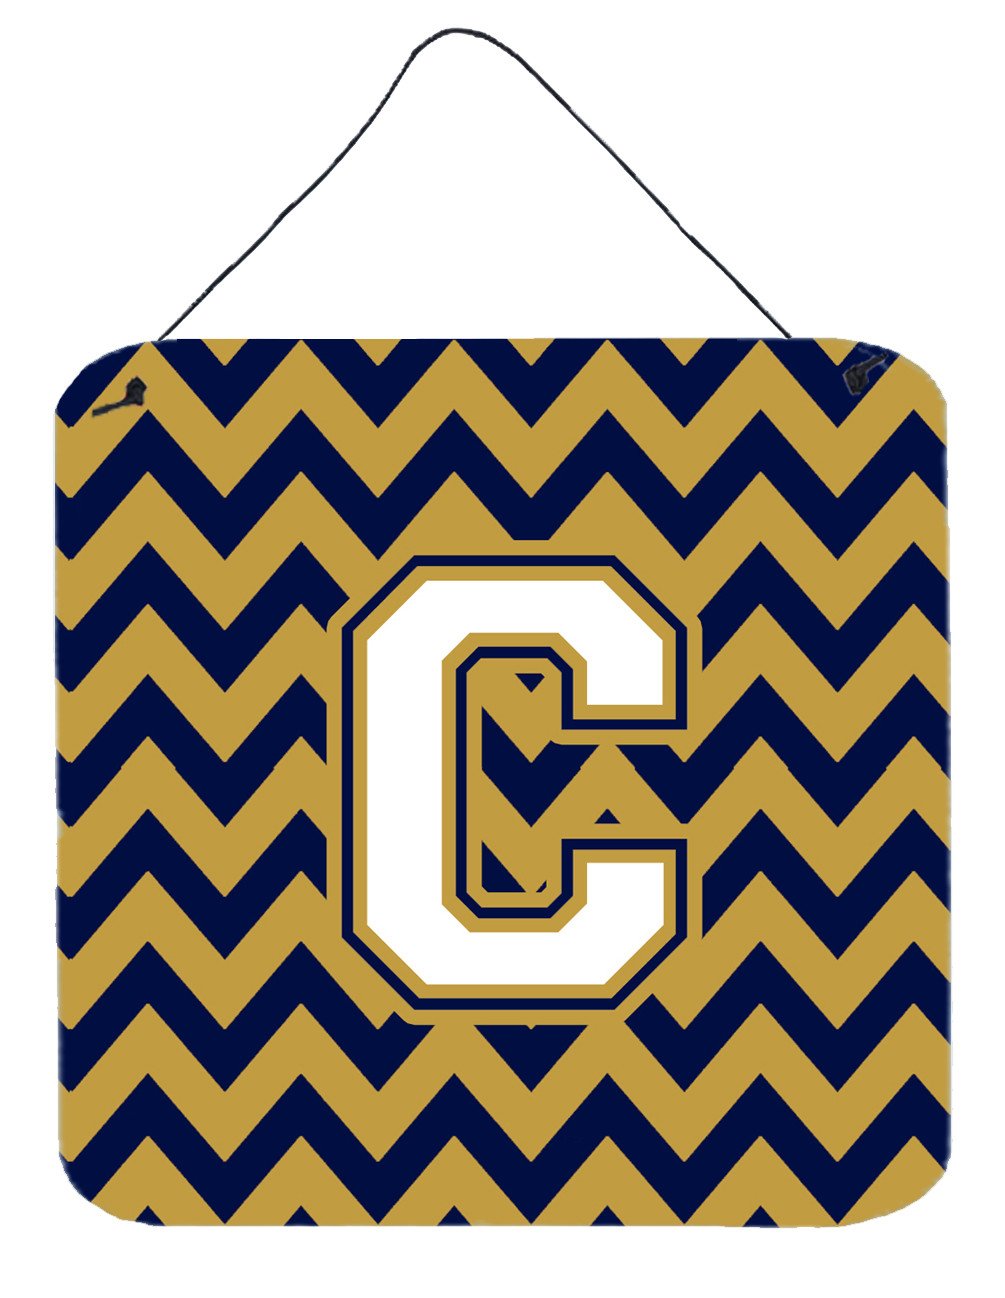 Letter C Chevron Navy Blue and Gold Wall or Door Hanging Prints CJ1057-CDS66 by Caroline's Treasures